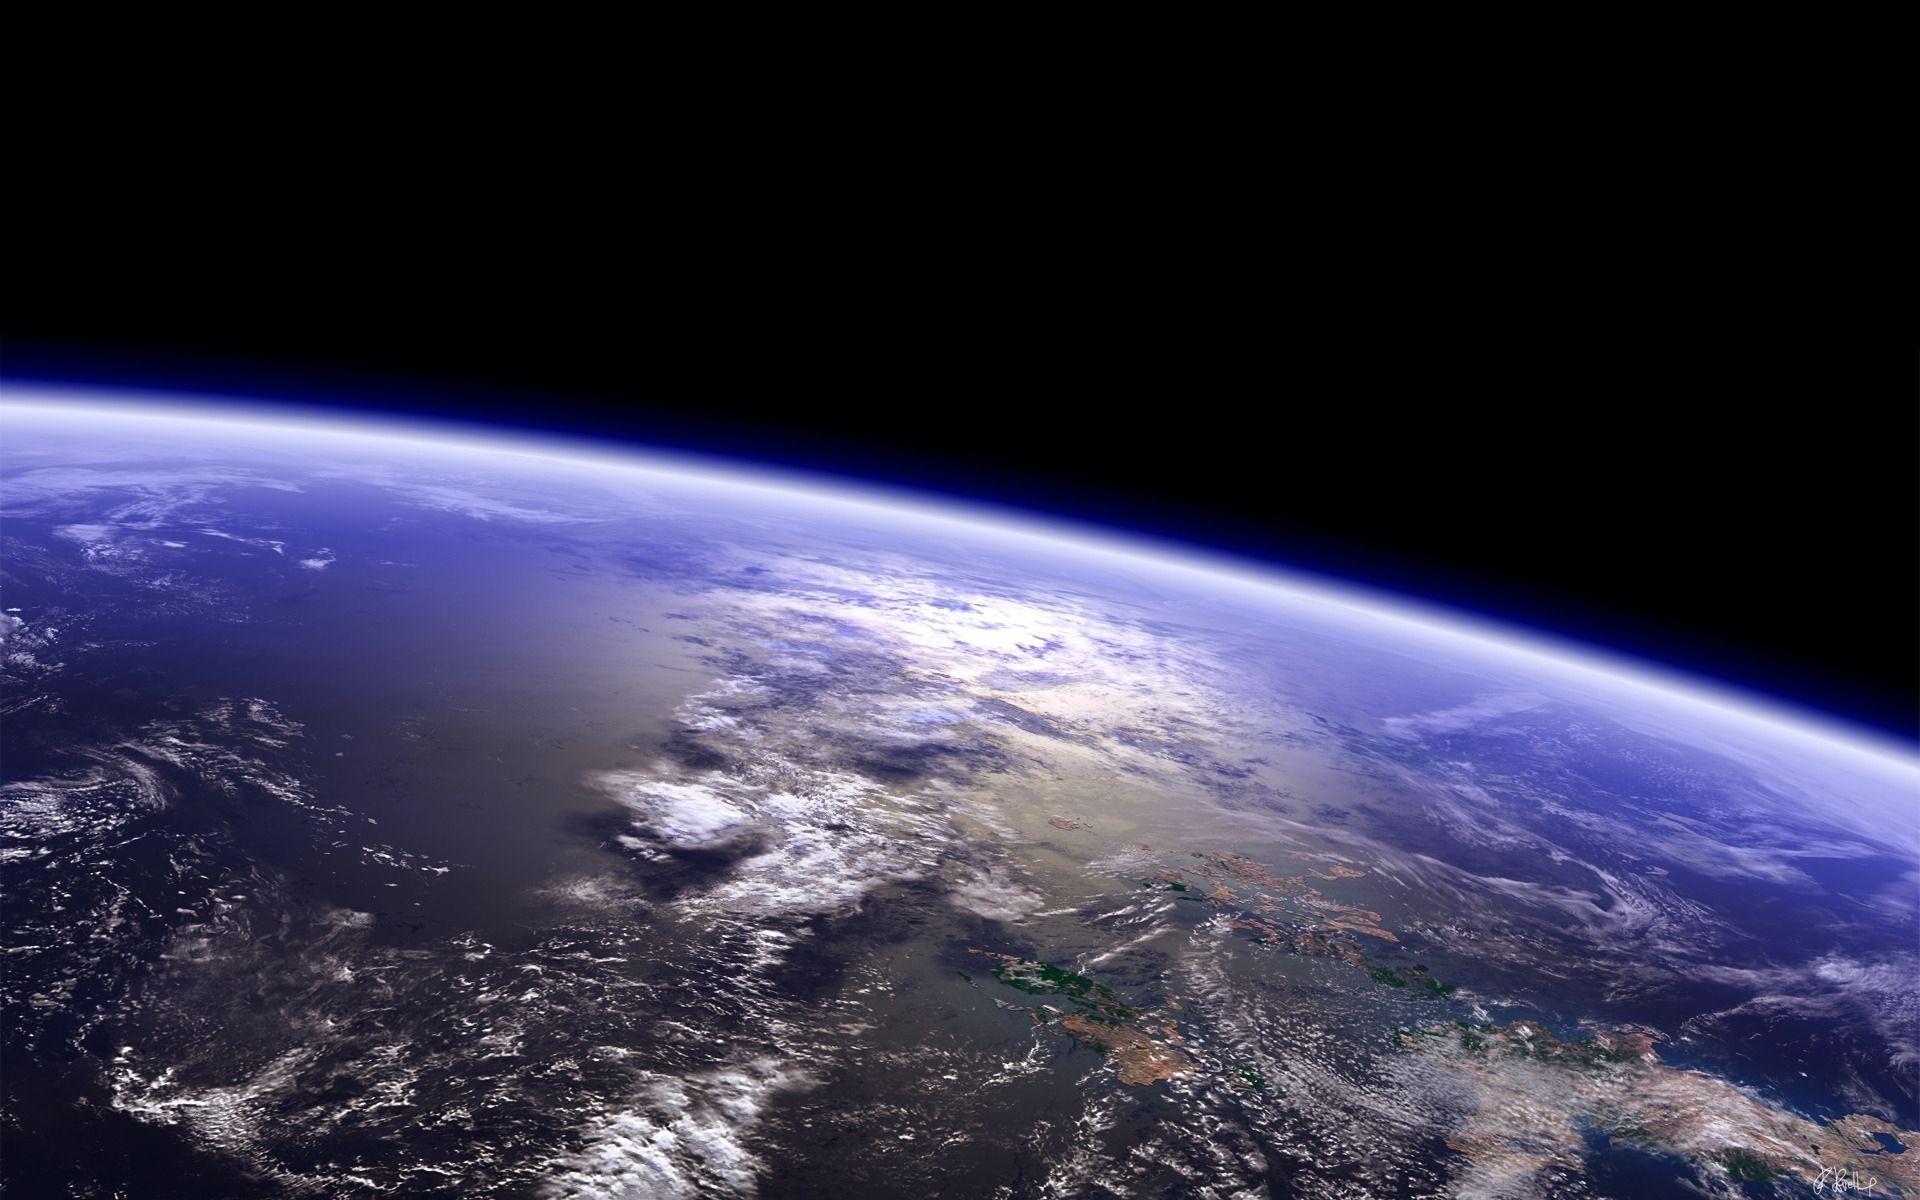 Earth View from Space HD Wallpaper. Download Free HD Wallpaper